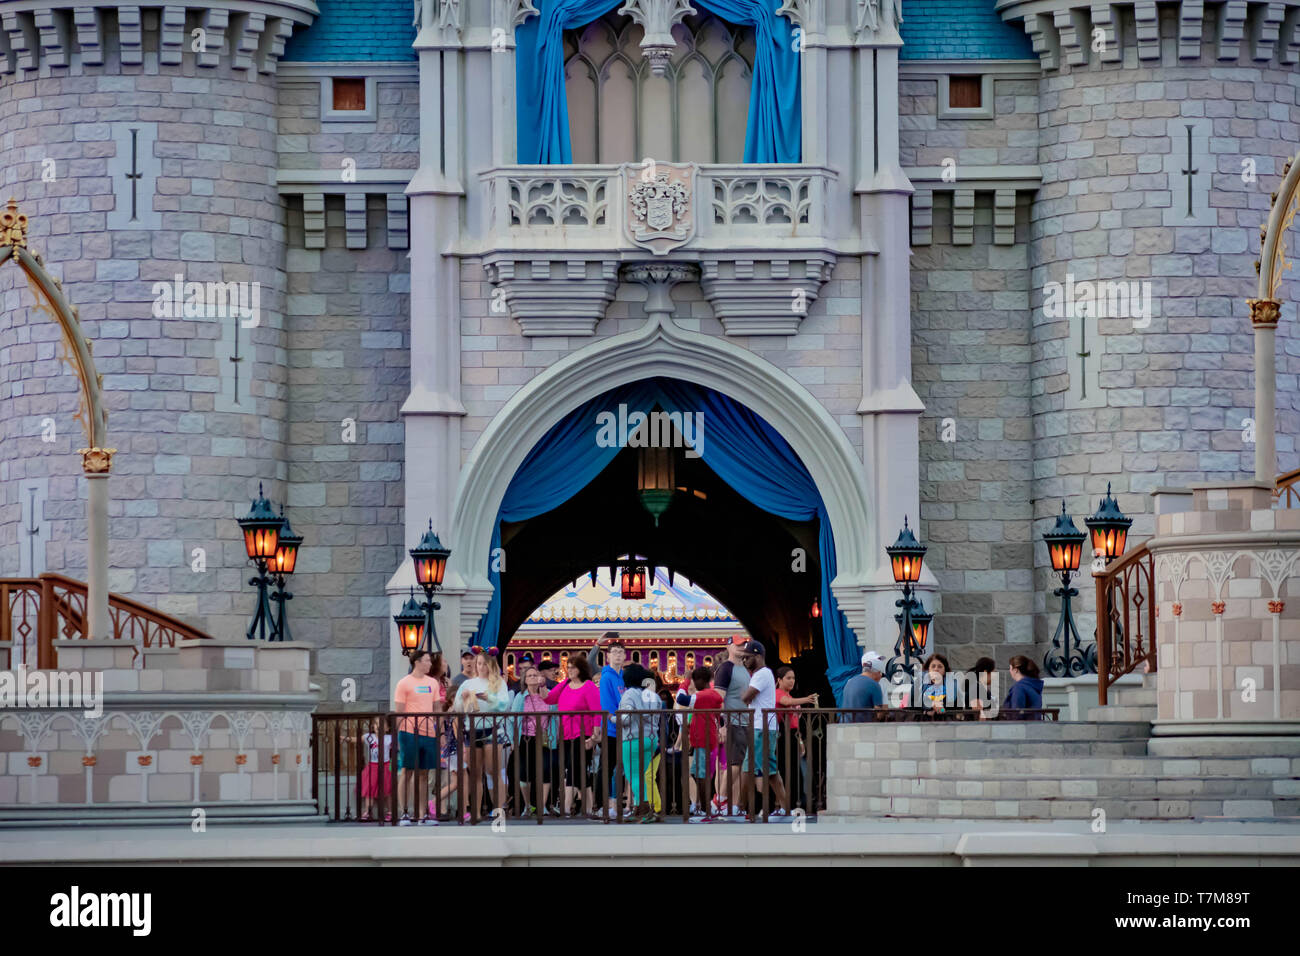 Orlando, Florida. April 02, 2019. People of different nationalities on the terrace of Cinderella's Castle at Walt Disney World . Stock Photo